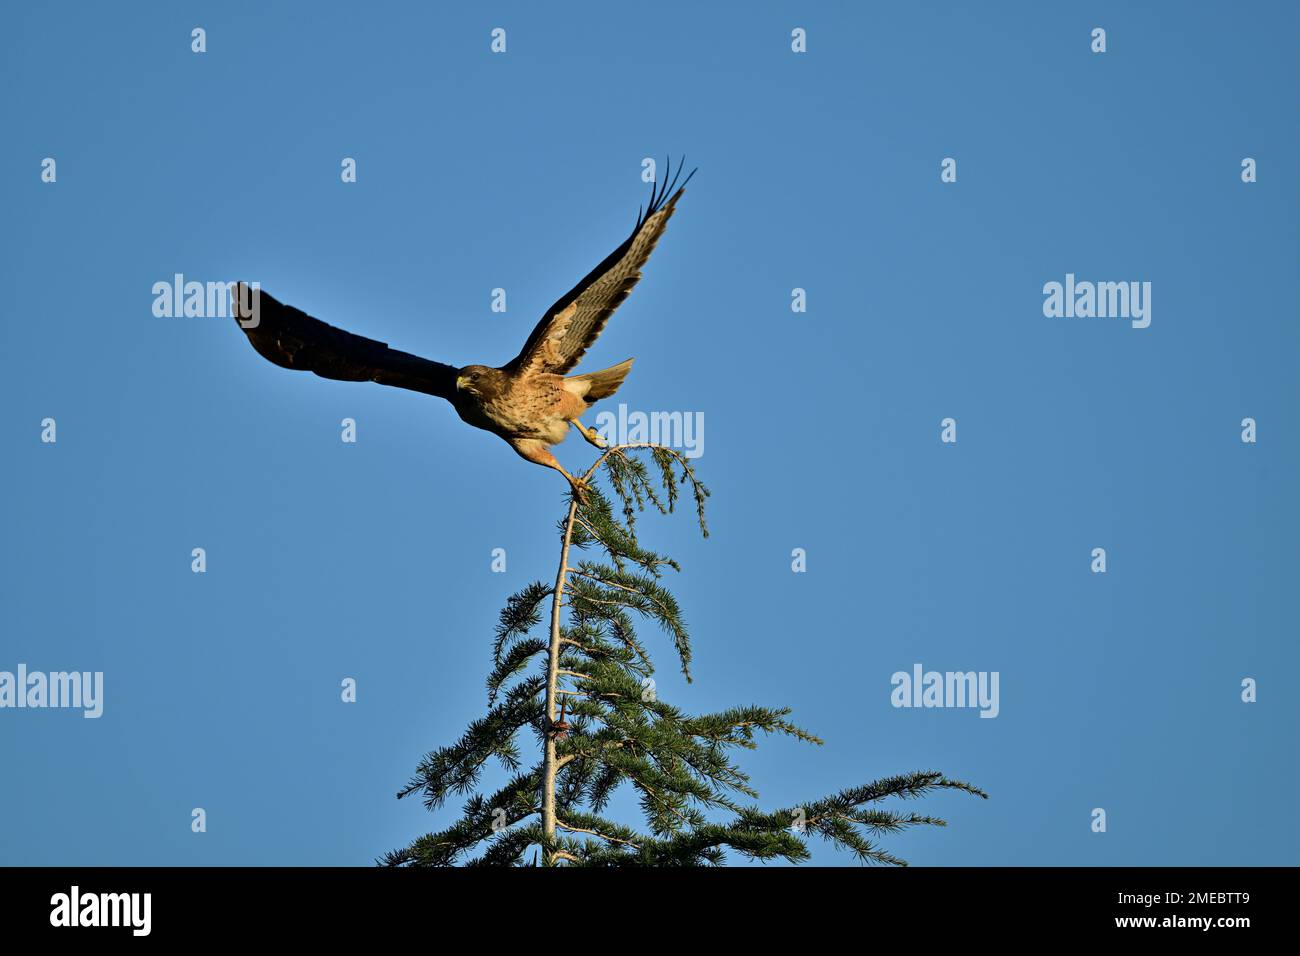 A Cooper's Hawk Lifting Off from a Tree Stock Photo